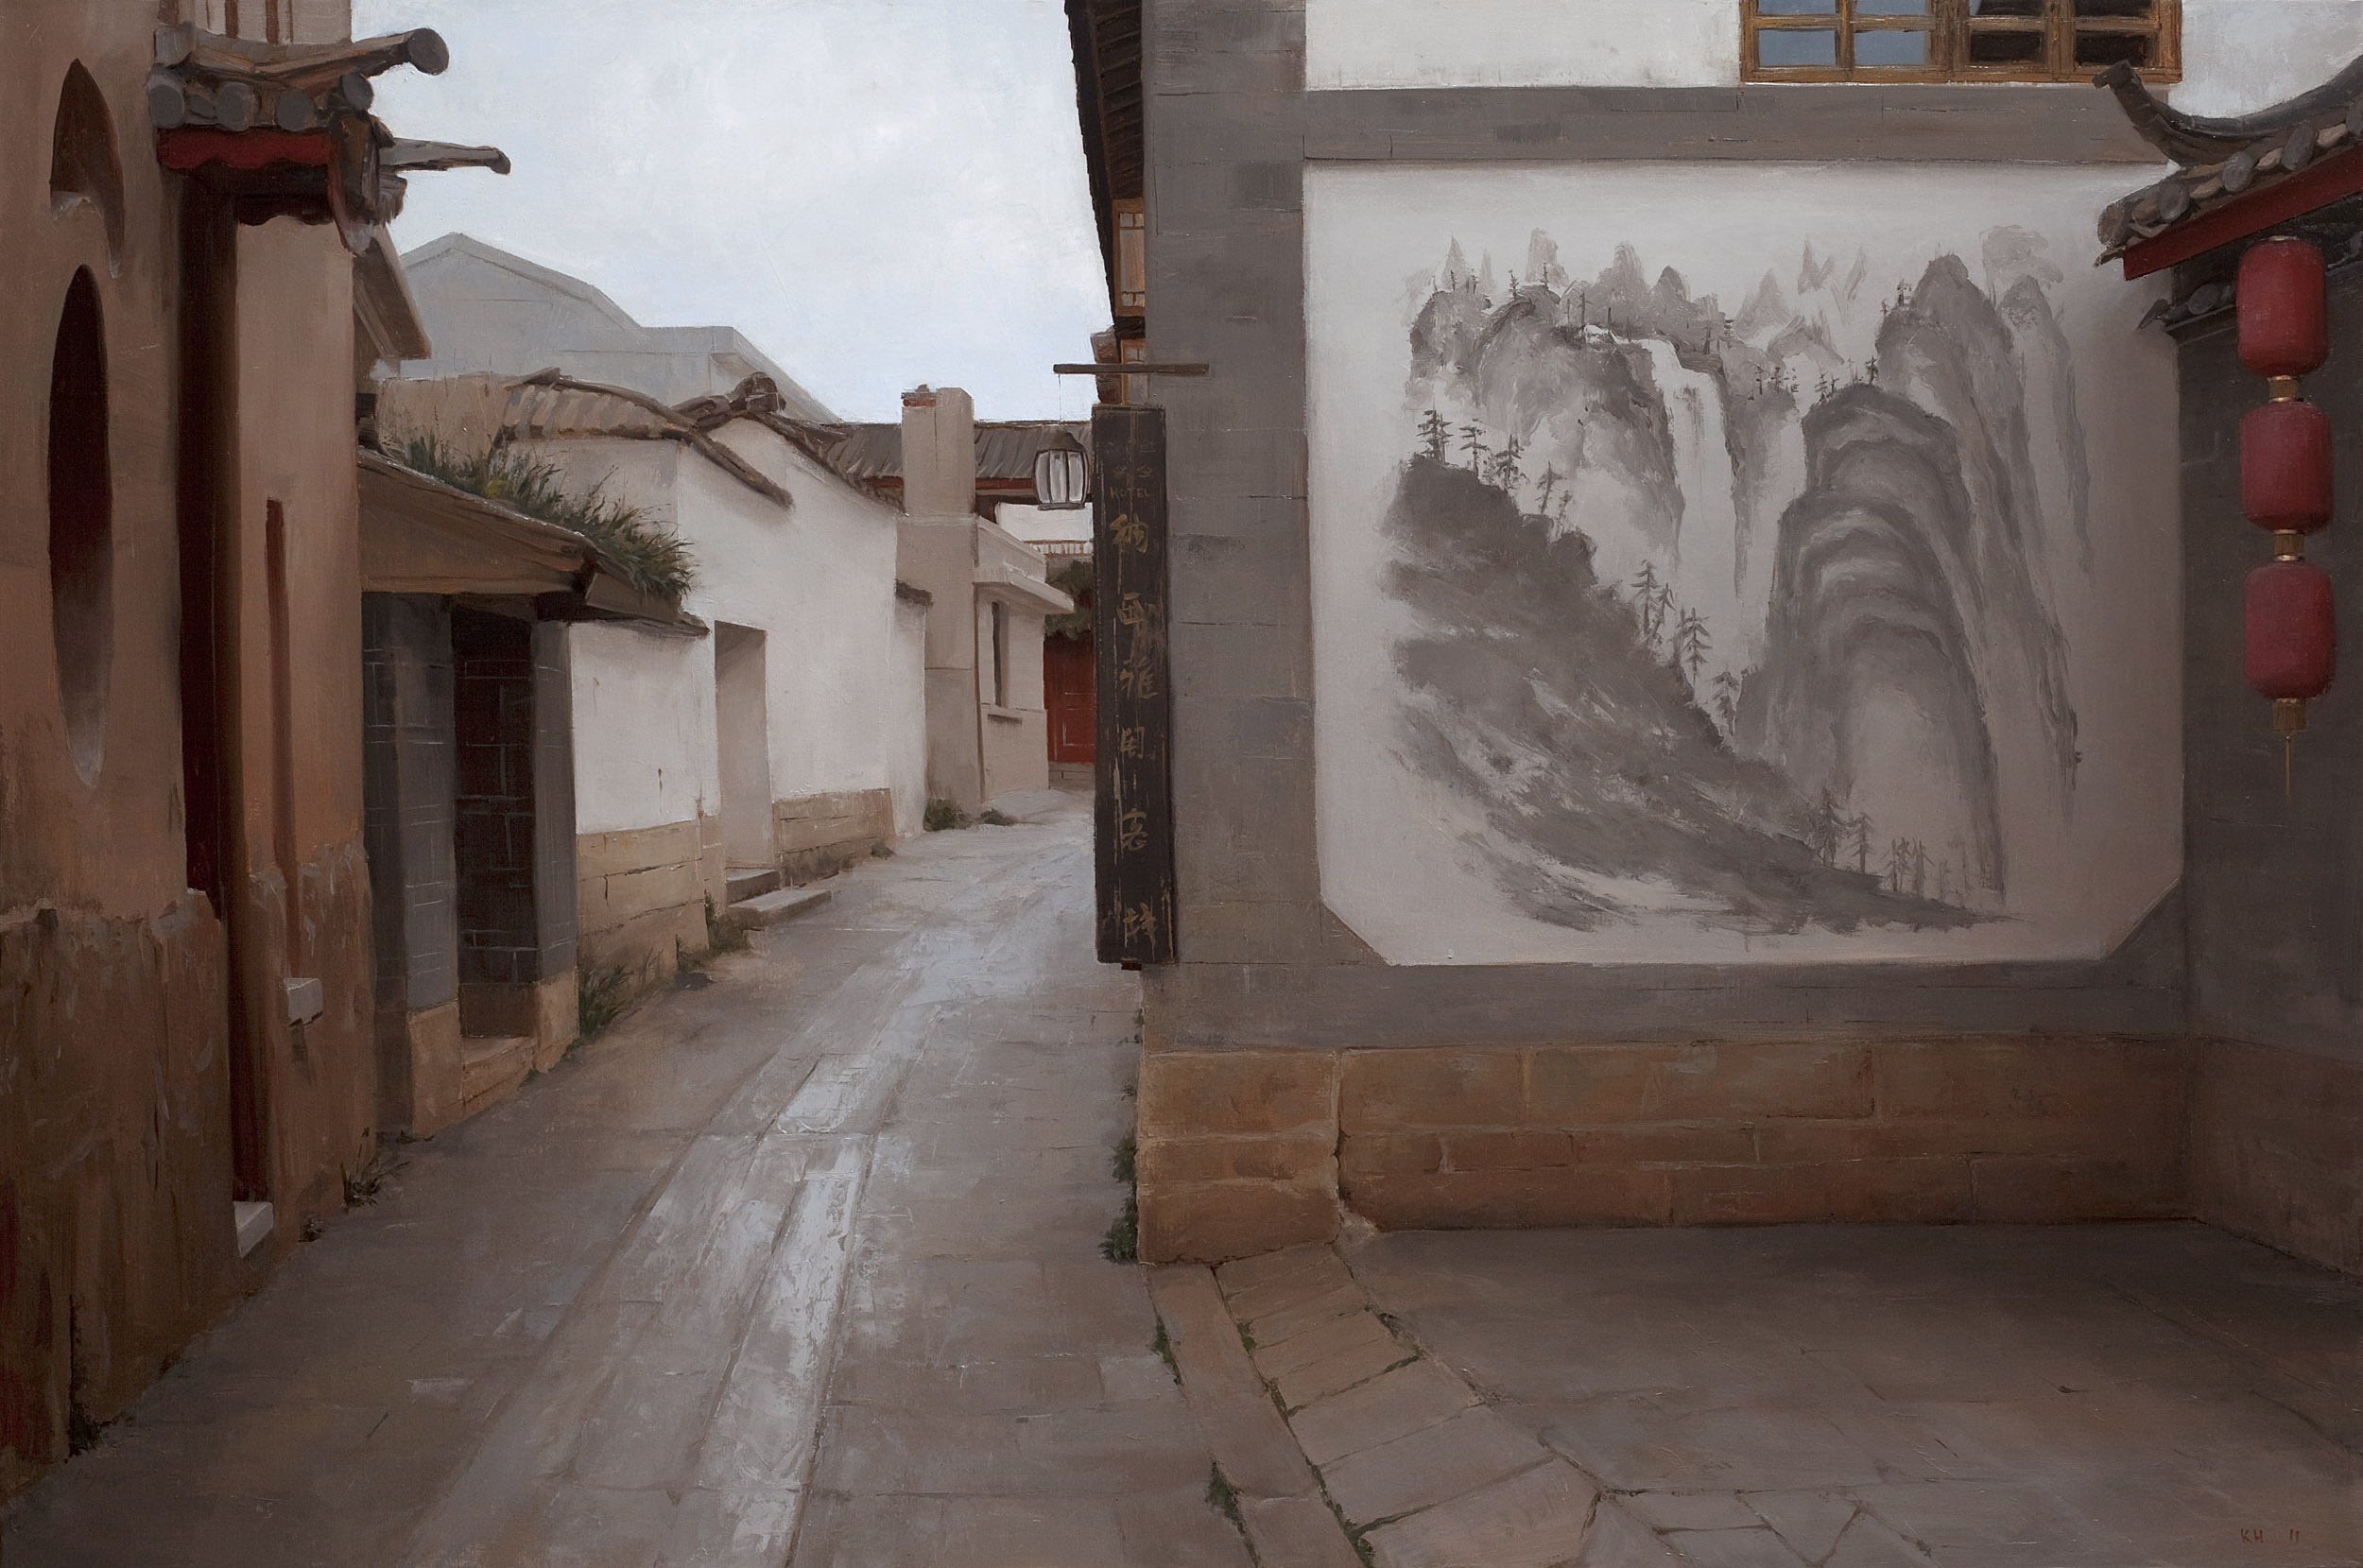 Kenny Harris, "Lijiang," 48 x 72 inches, Oil on linen, plein air painting